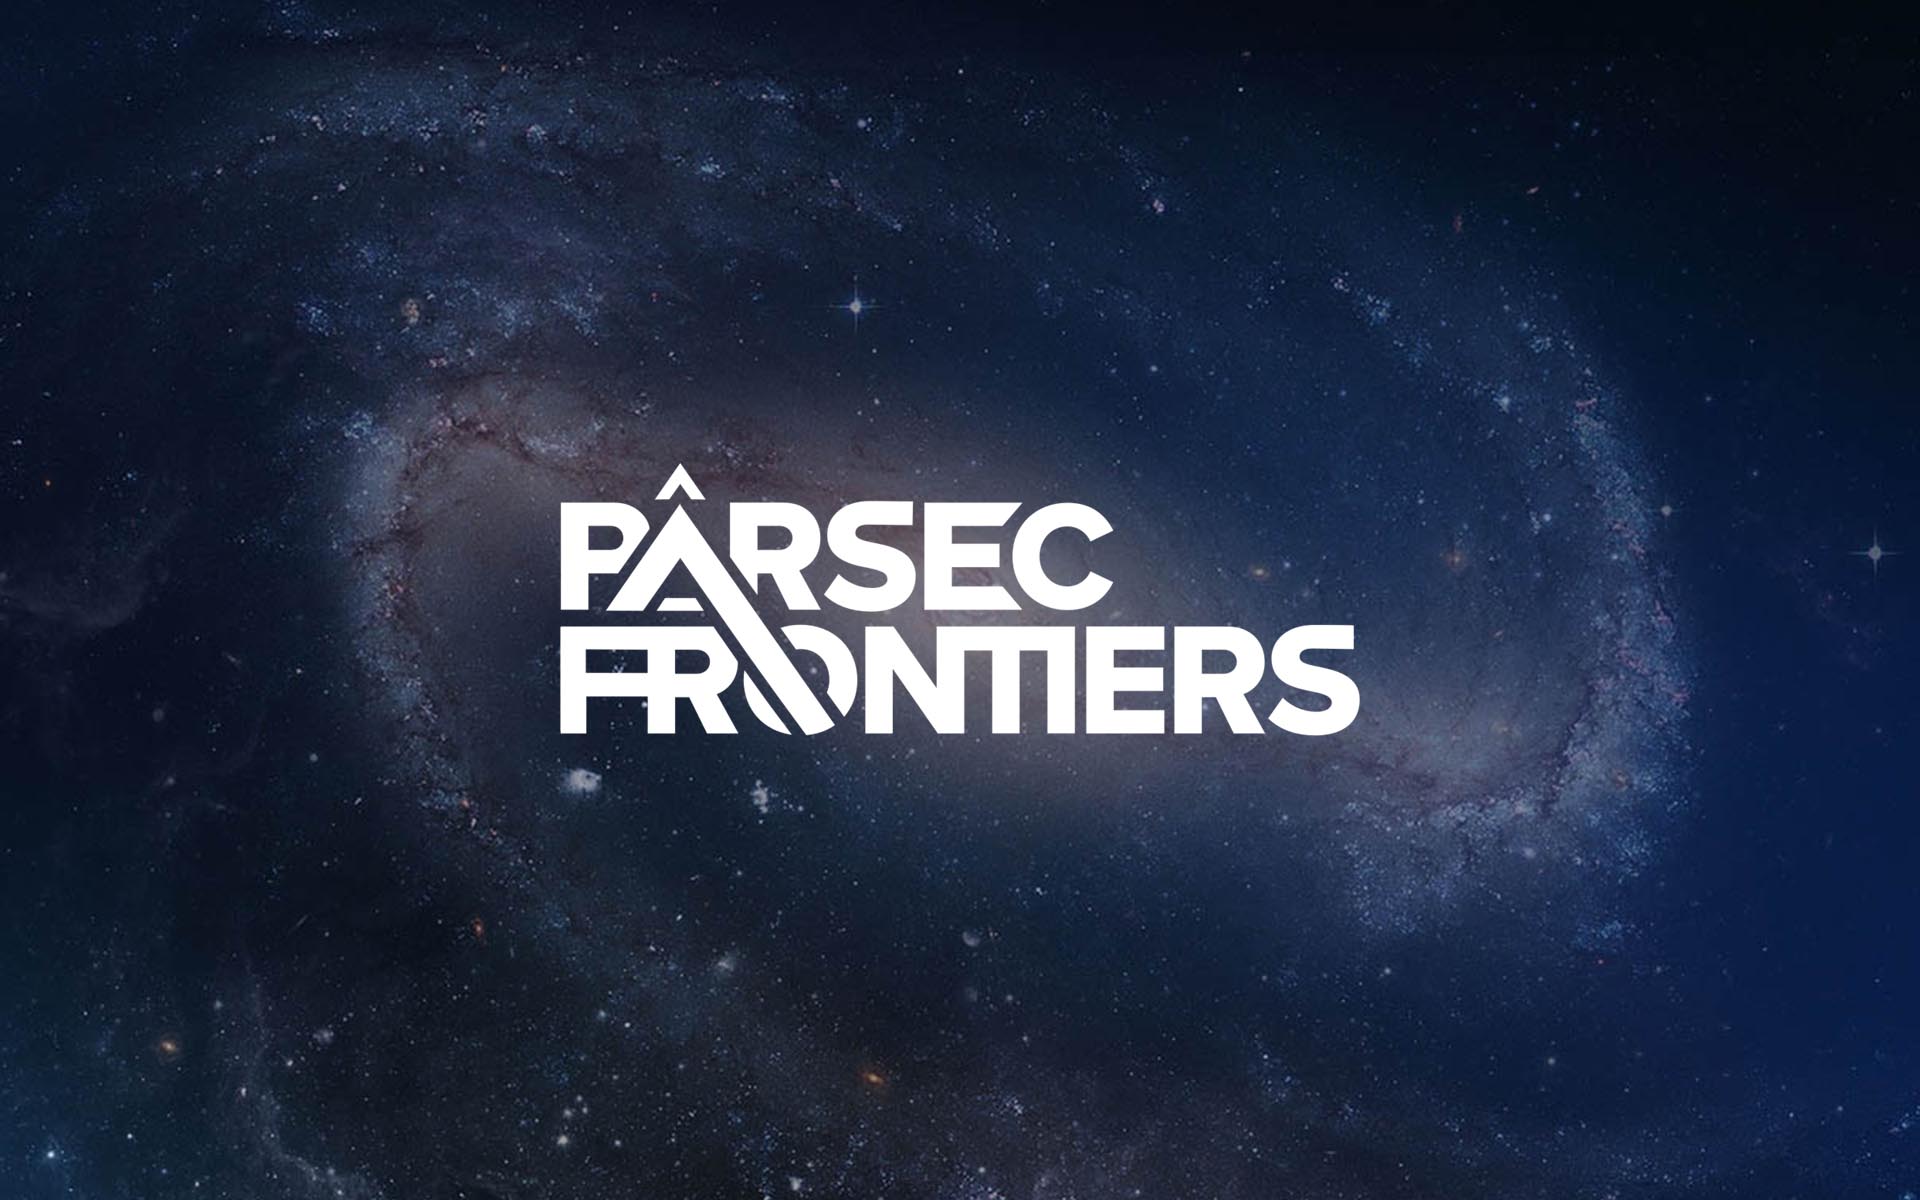 Parsec Frontiers Opens Doors To New Galaxies With Its ICO